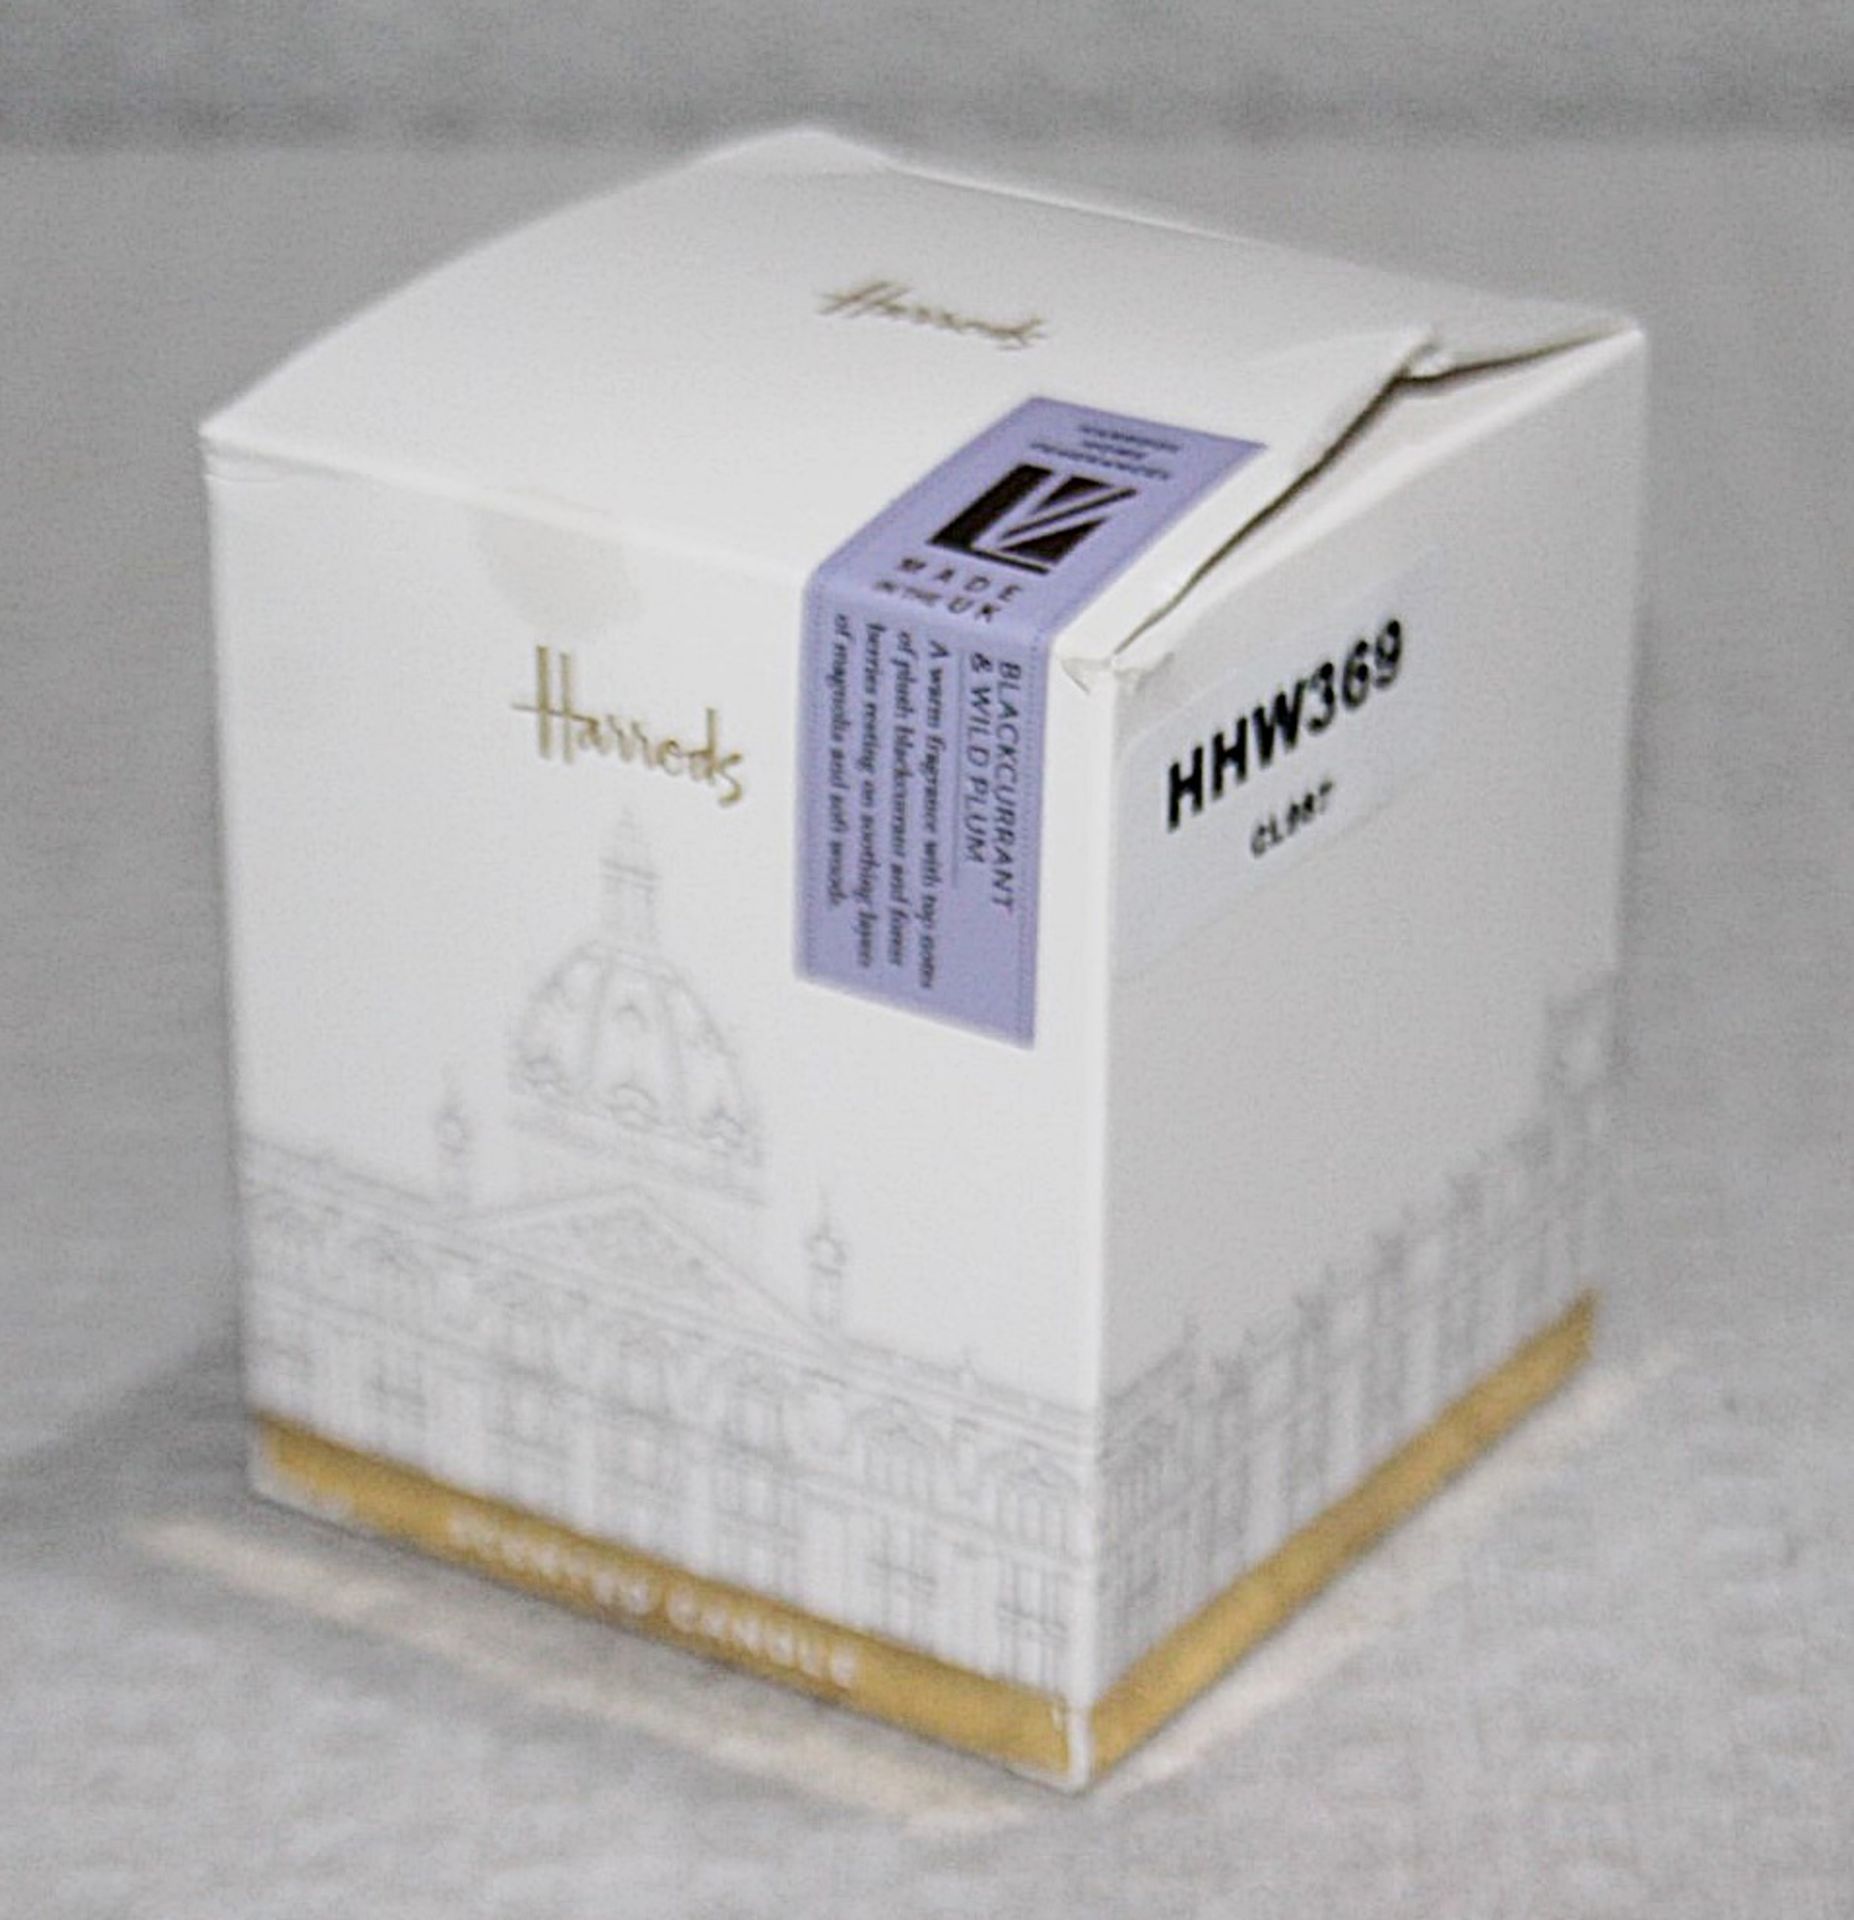 1 x HARRODS Branded Blackcurrant And Wild Plum Candle (230g) - Unused Boxed Stock - Ref: HHW369/ - Image 5 of 5